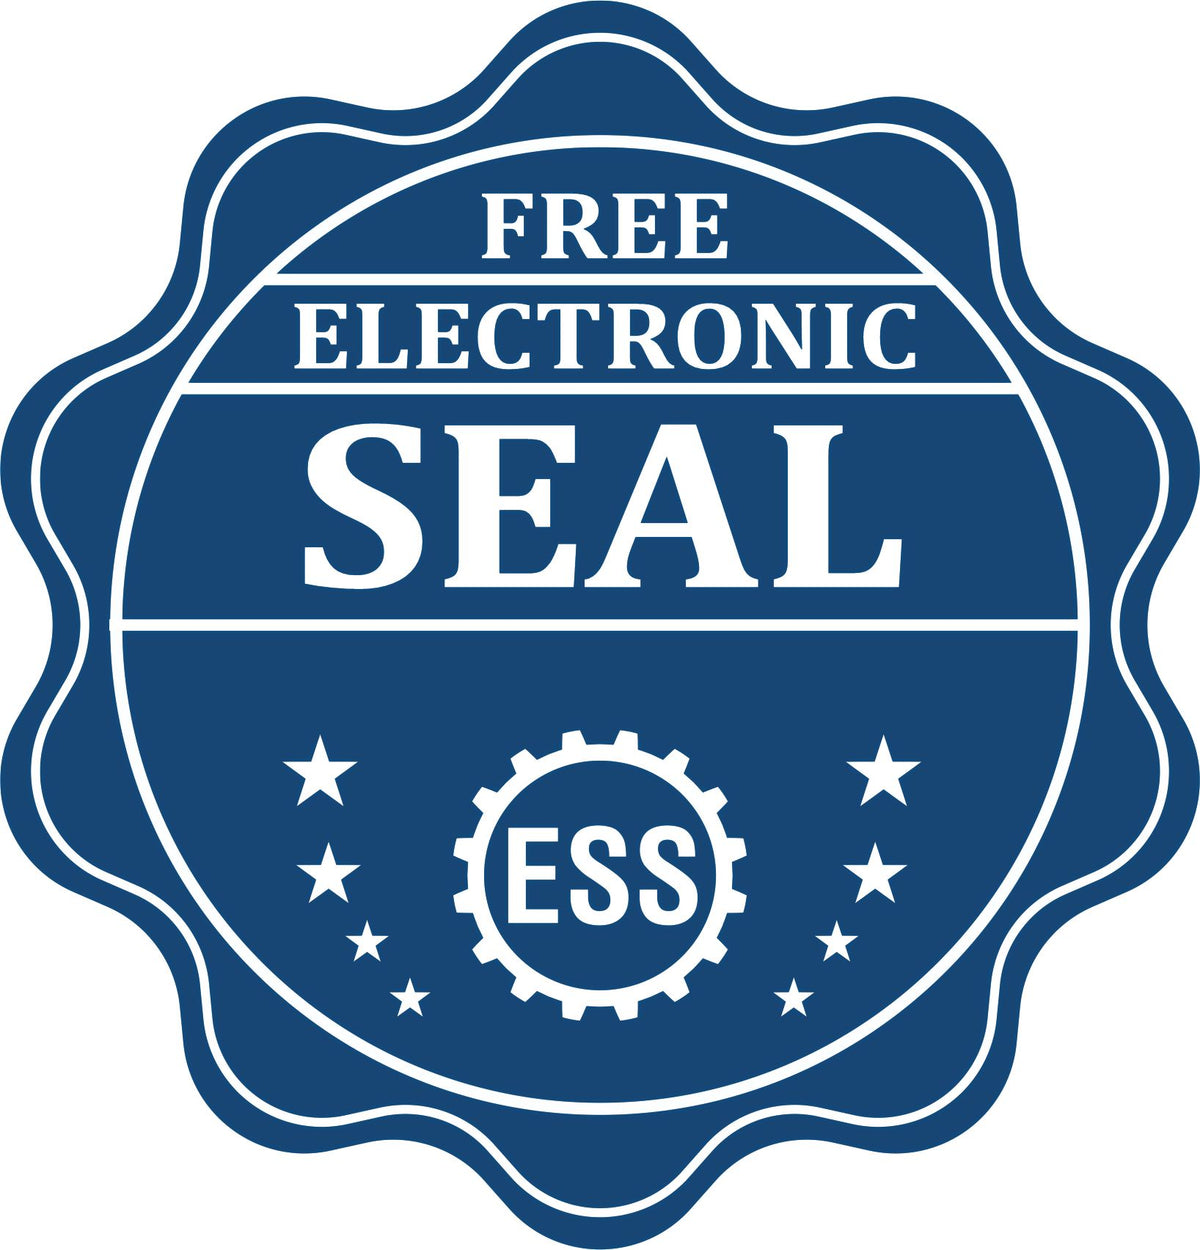 A badge showing a free electronic seal for the State of Indiana Soft Land Surveyor Embossing Seal with stars and the ESS gear on the emblem.